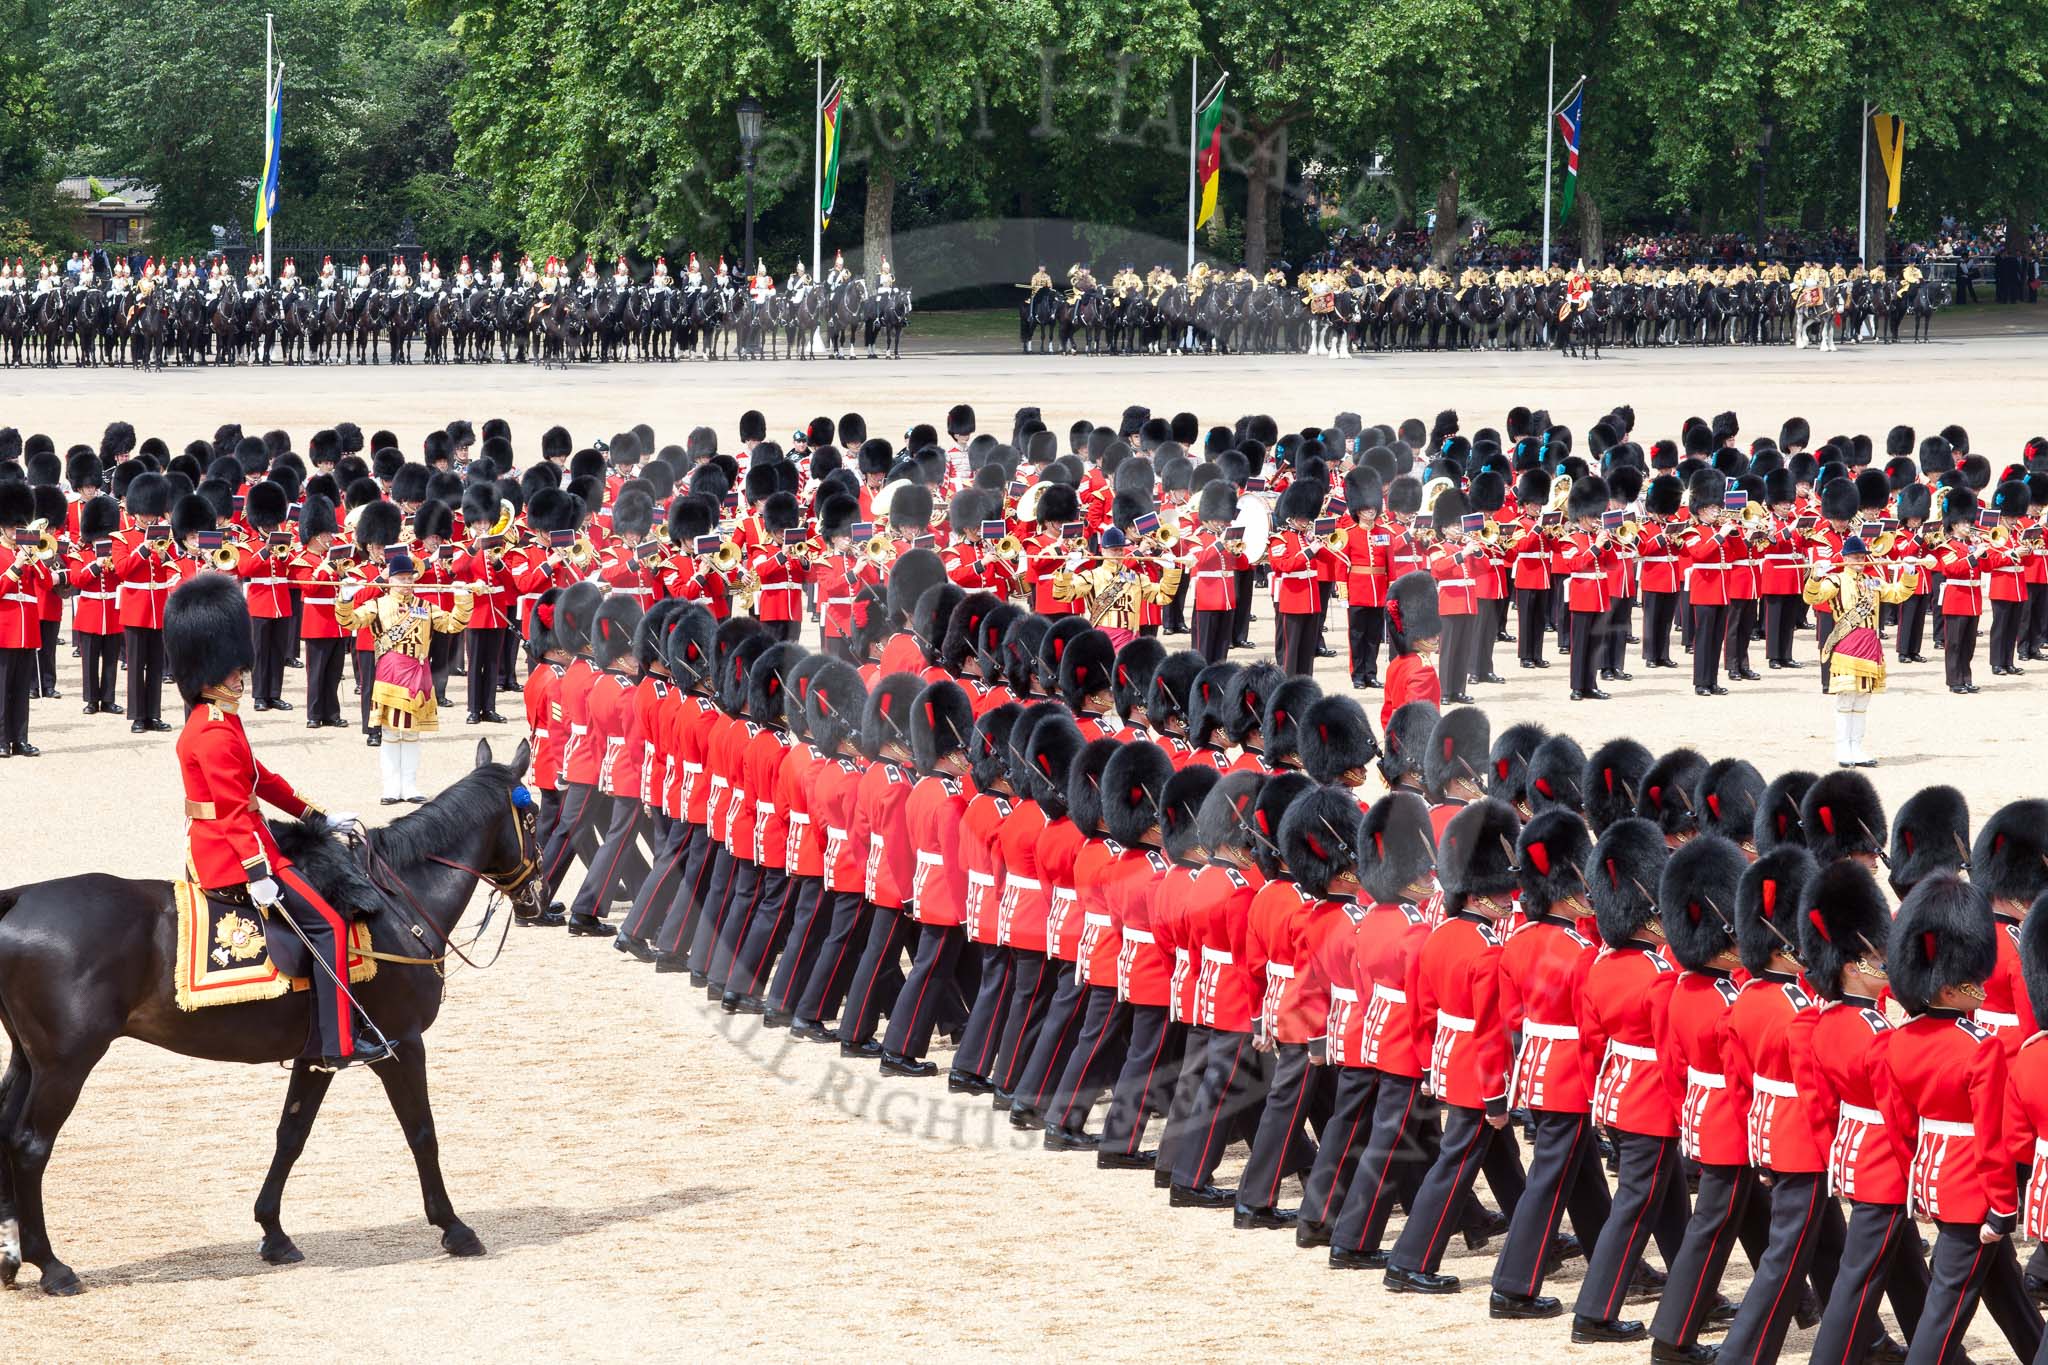 The Colonel's Review 2011: No. 6 Guard, No. 7 Company Coldstream Guards, during the March Past in slow time. They are followed by the Adjutant of the Parade,  Captain Hamish Barne, 1st Battalion Scots Guards..
Horse Guards Parade, Westminster,
London SW1,

United Kingdom,
on 04 June 2011 at 11:38, image #180